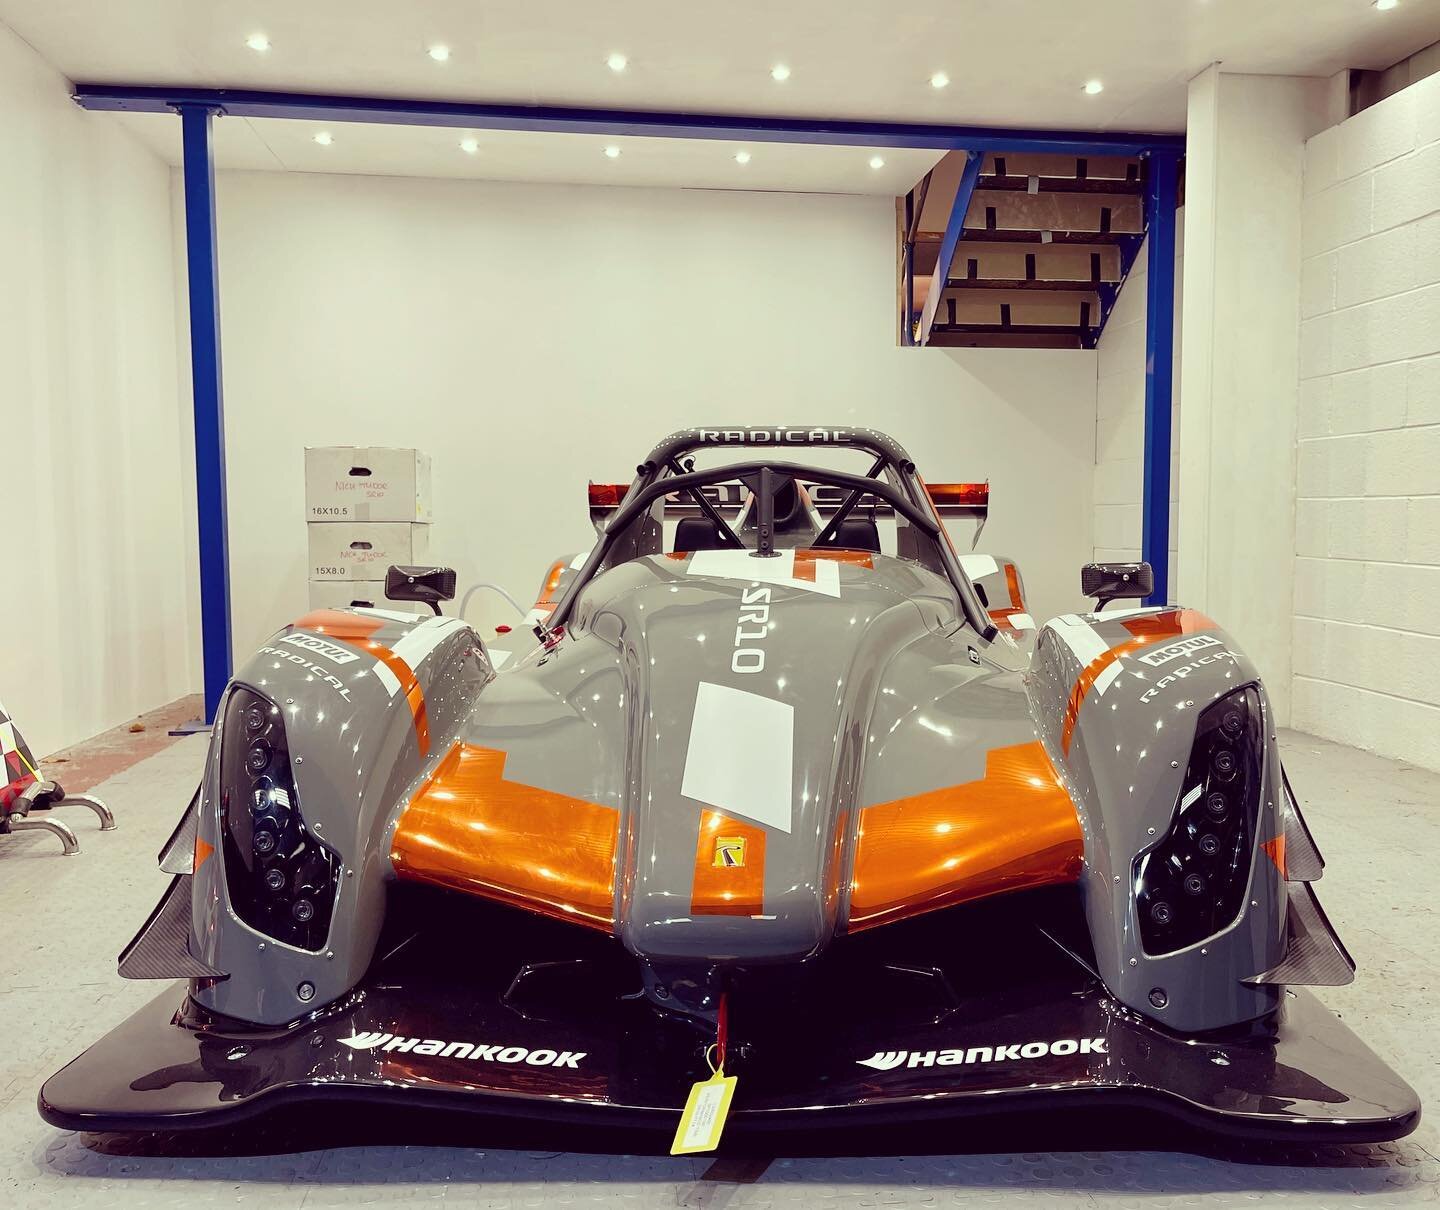 New Radical SR10 just delivered to a thrilled customer! After a few laps of the demo on track they knew they had to have one. The sleek design, awesome brakes and powerful performance left them speechless. Congratulations on your new ride! #radicalsr